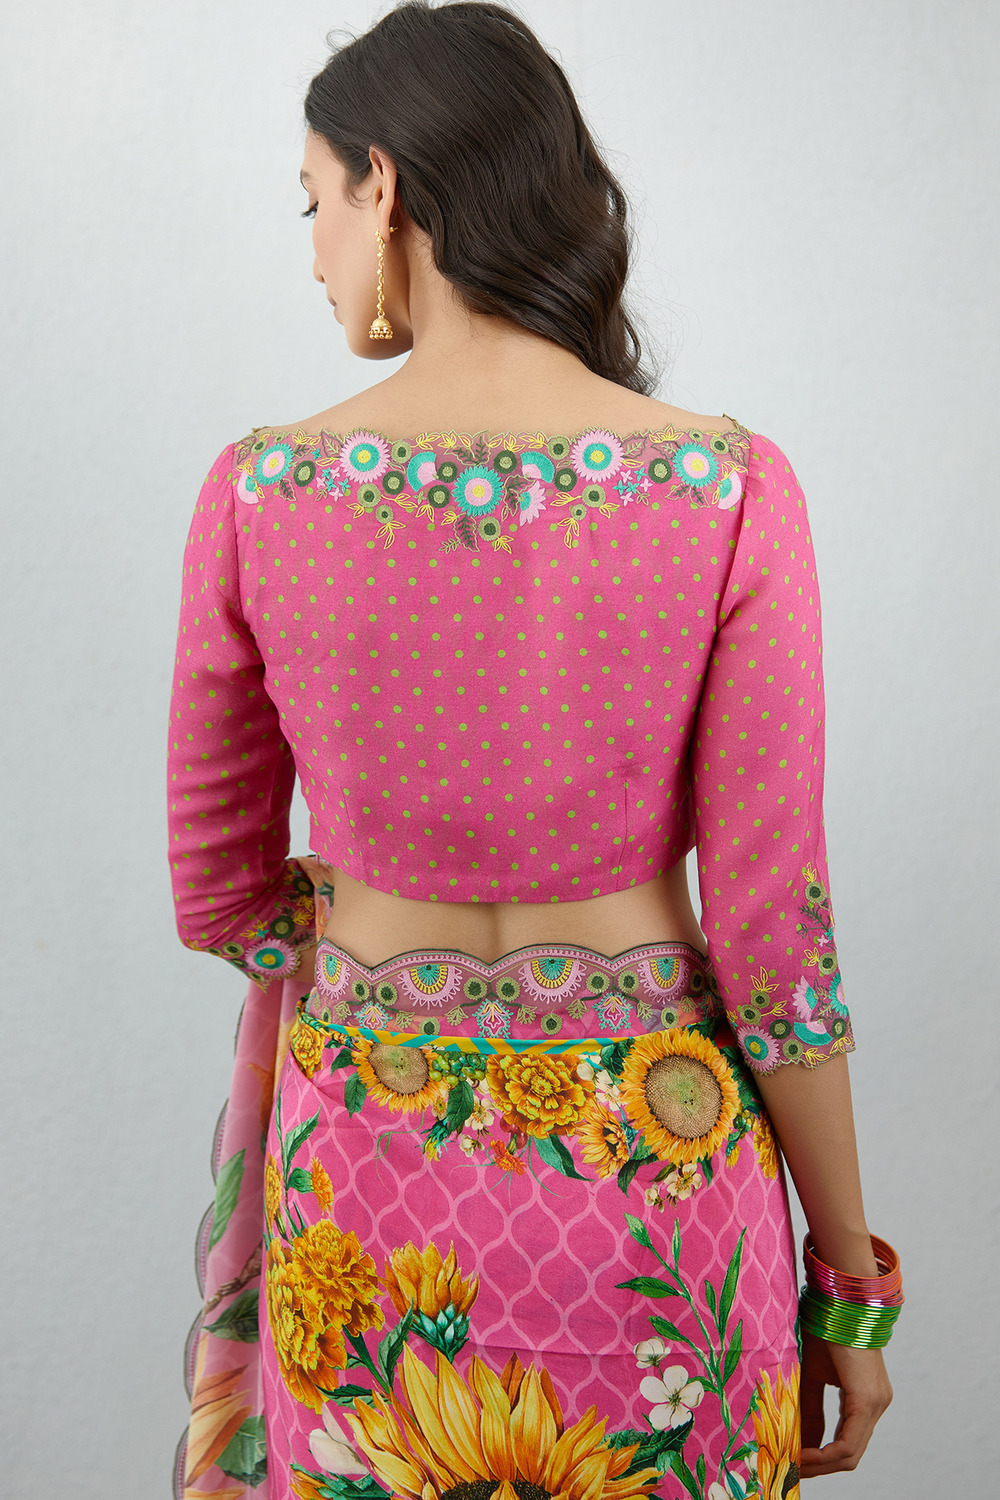 Boat Neck Blouse Designs See Top Latest And Modern Designs